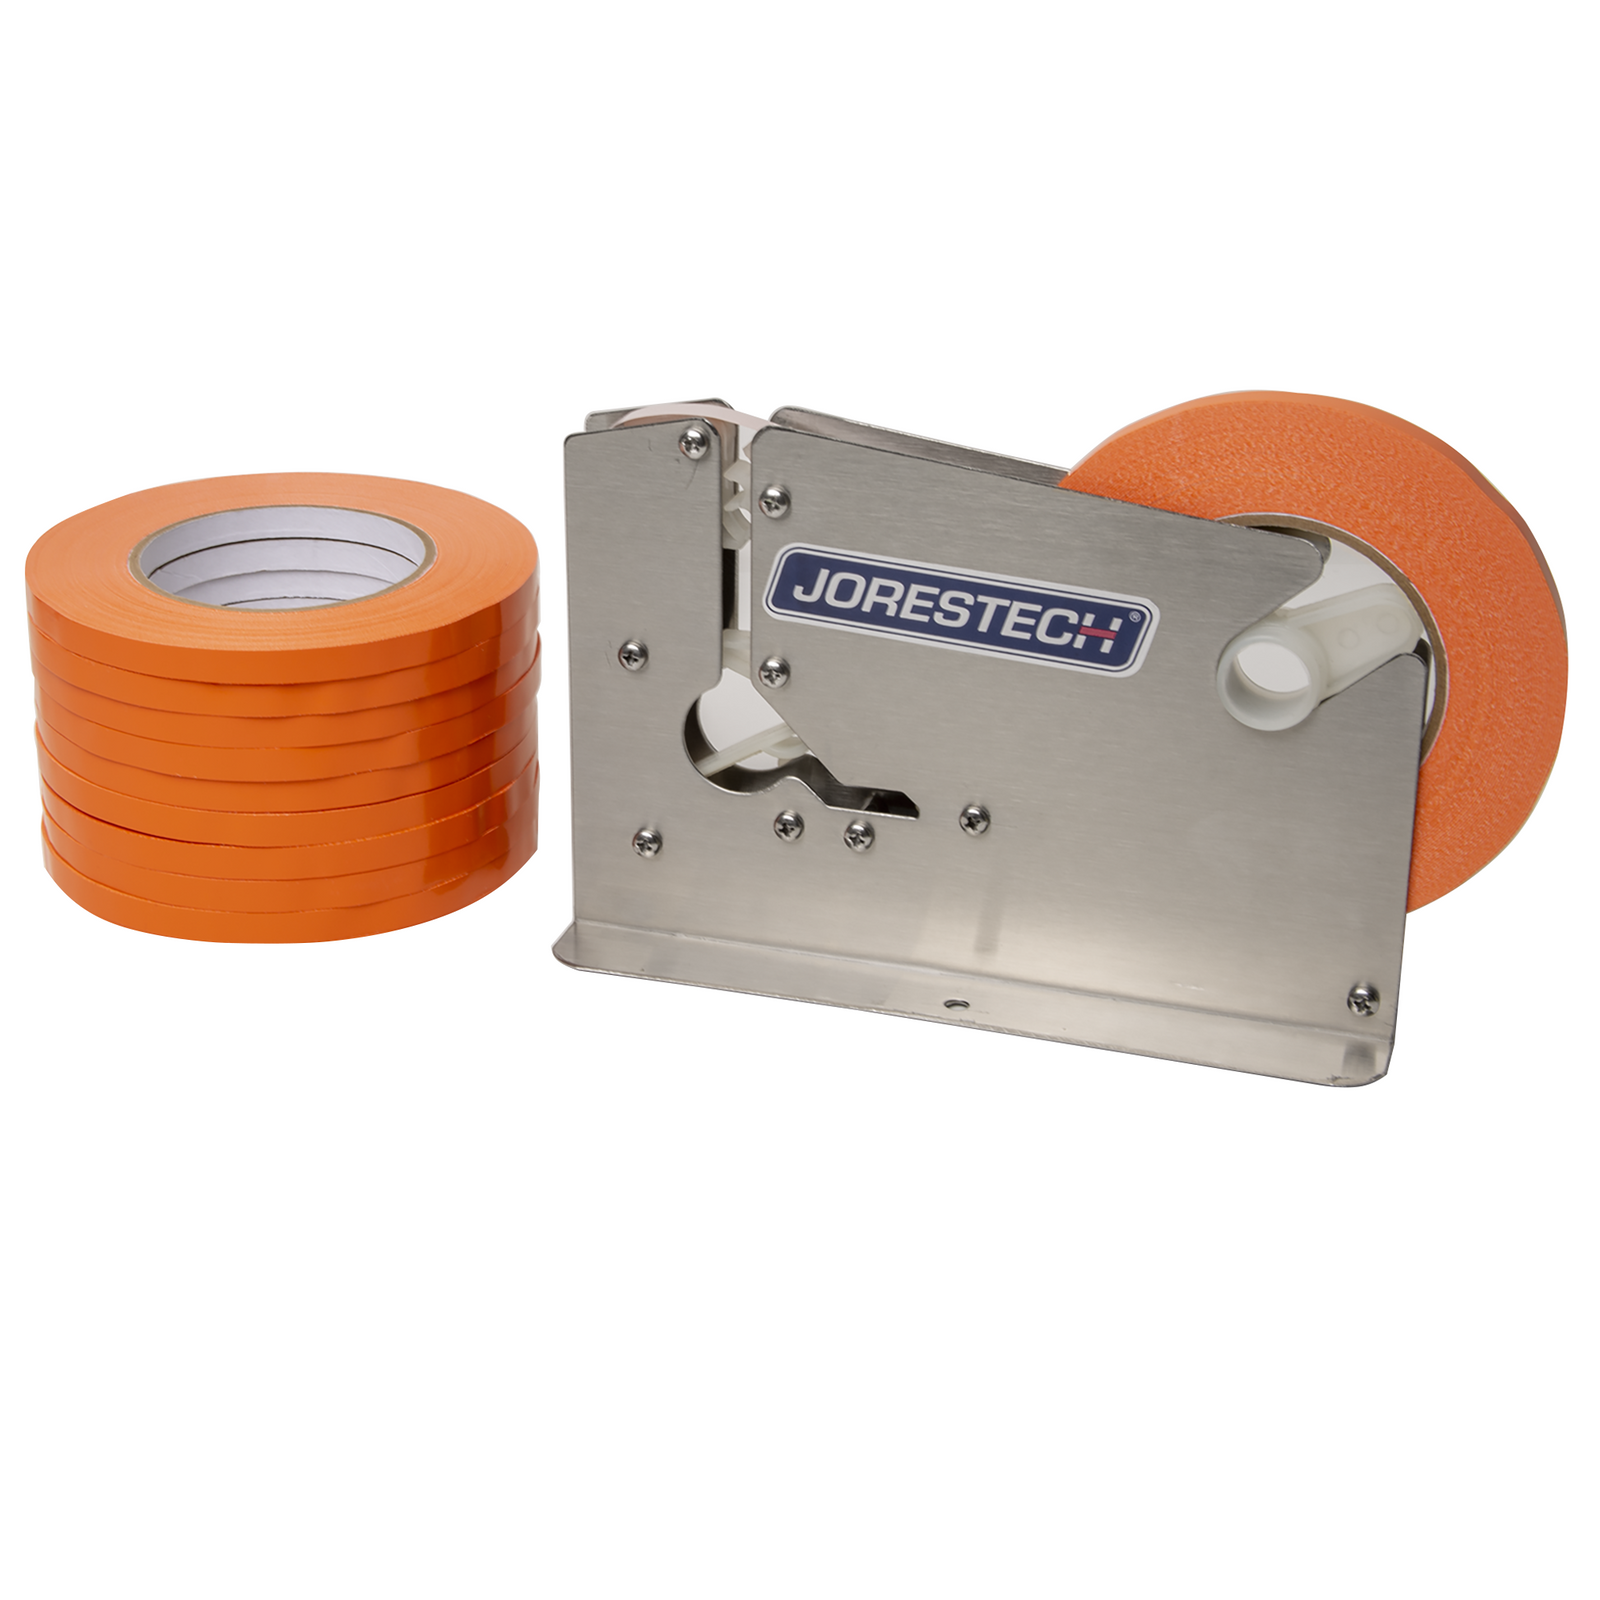 A stainless steel bag closer next to 10 adhesive orange tape rolls